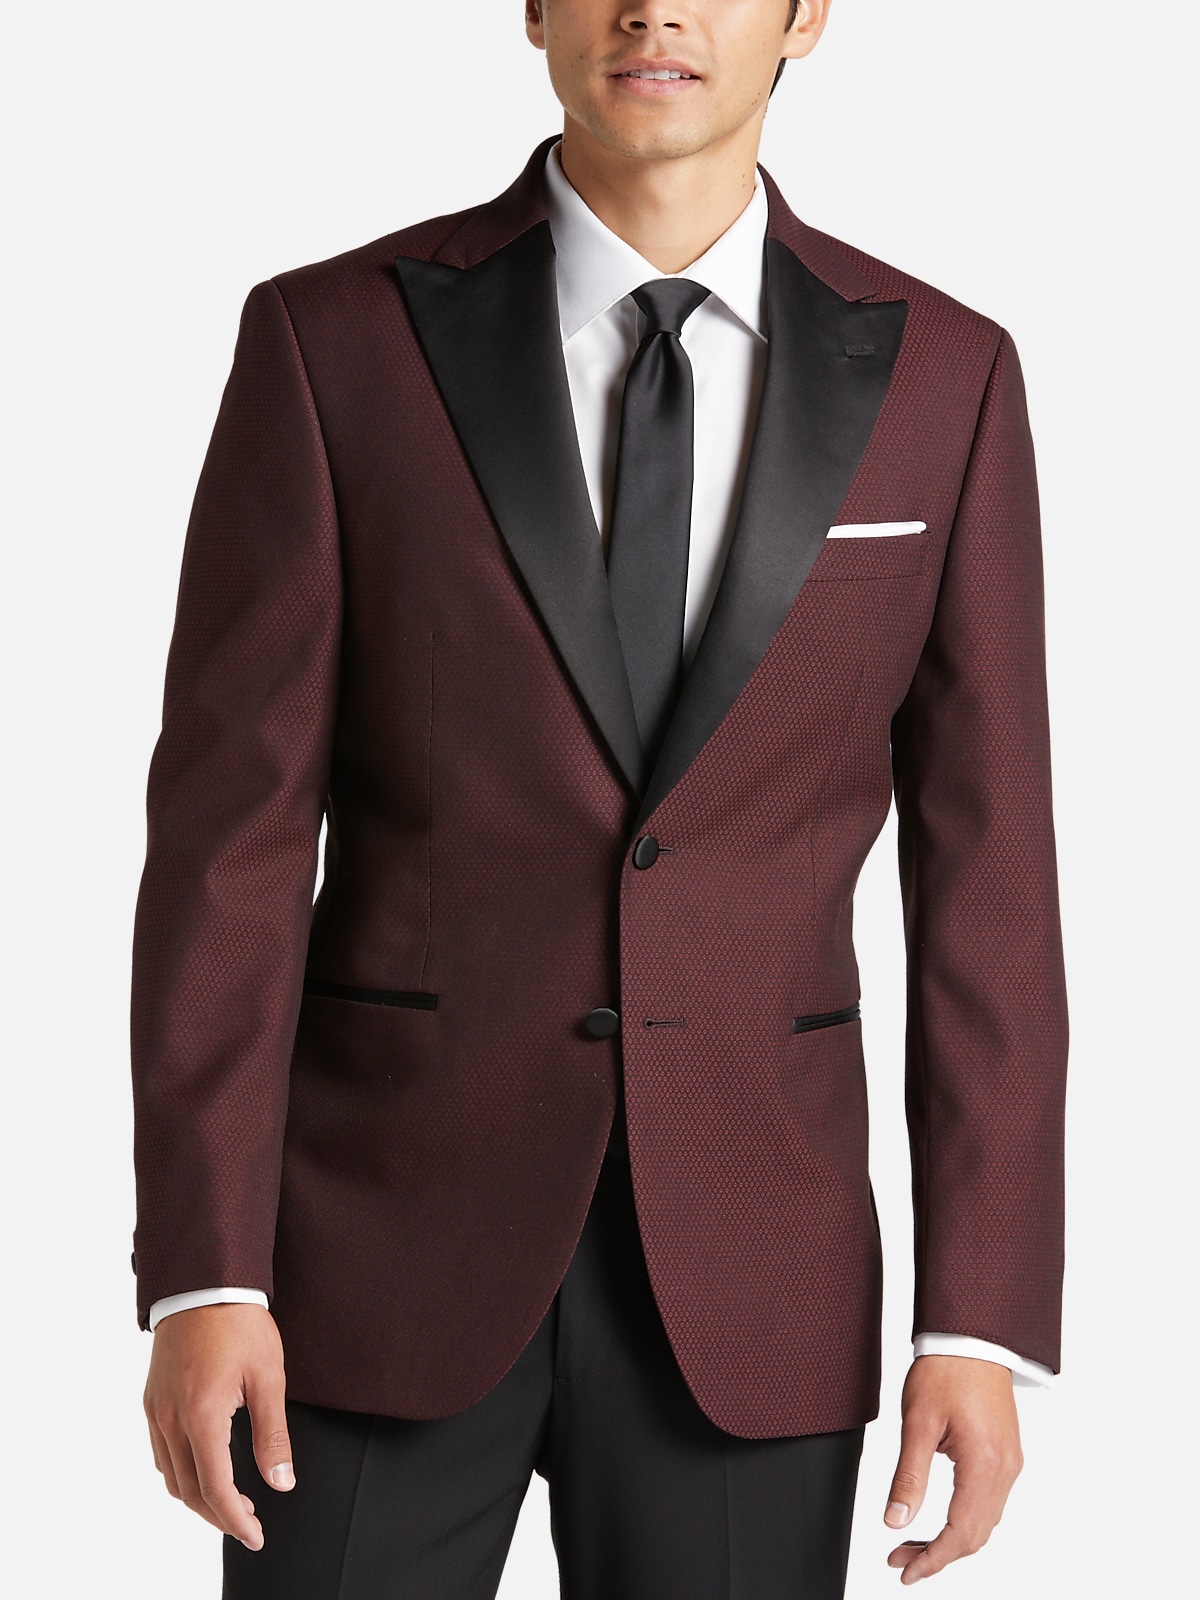 After Hours Slim Fit Peak Lapel Dinner Jacket | All Clearance $39.99 ...